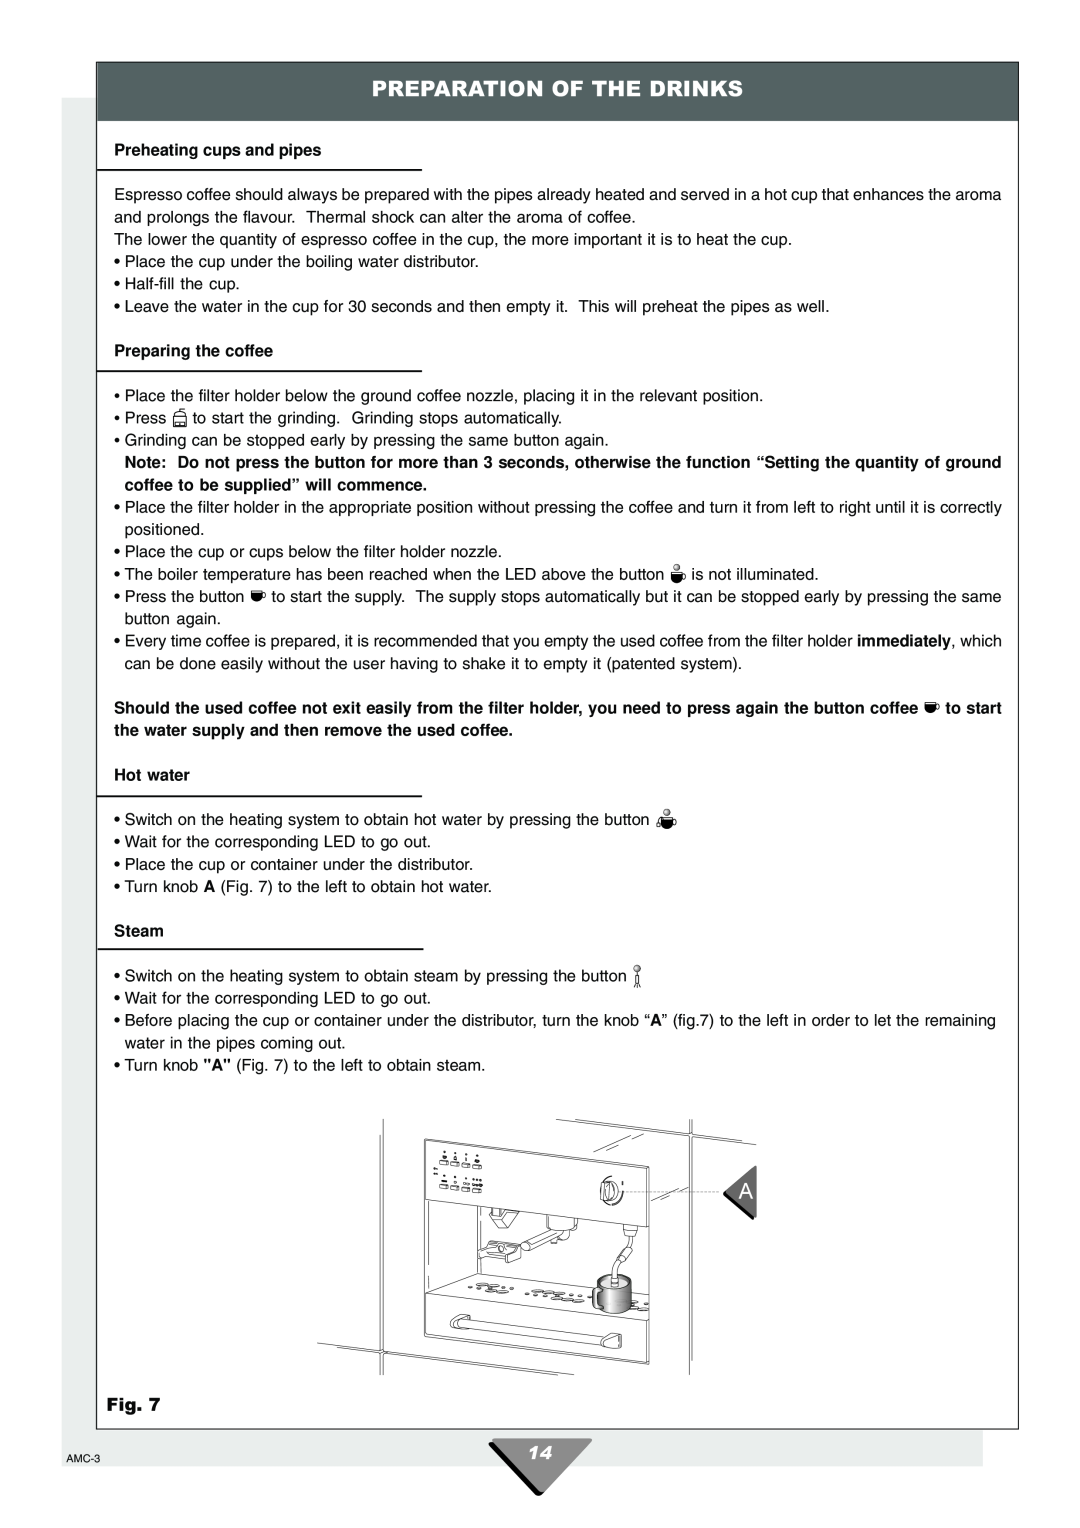 Hotpoint HCM60 manual Preparation Of The Drinks, Preheating cups and pipes, Preparing the coffee, Hot water, Steam 